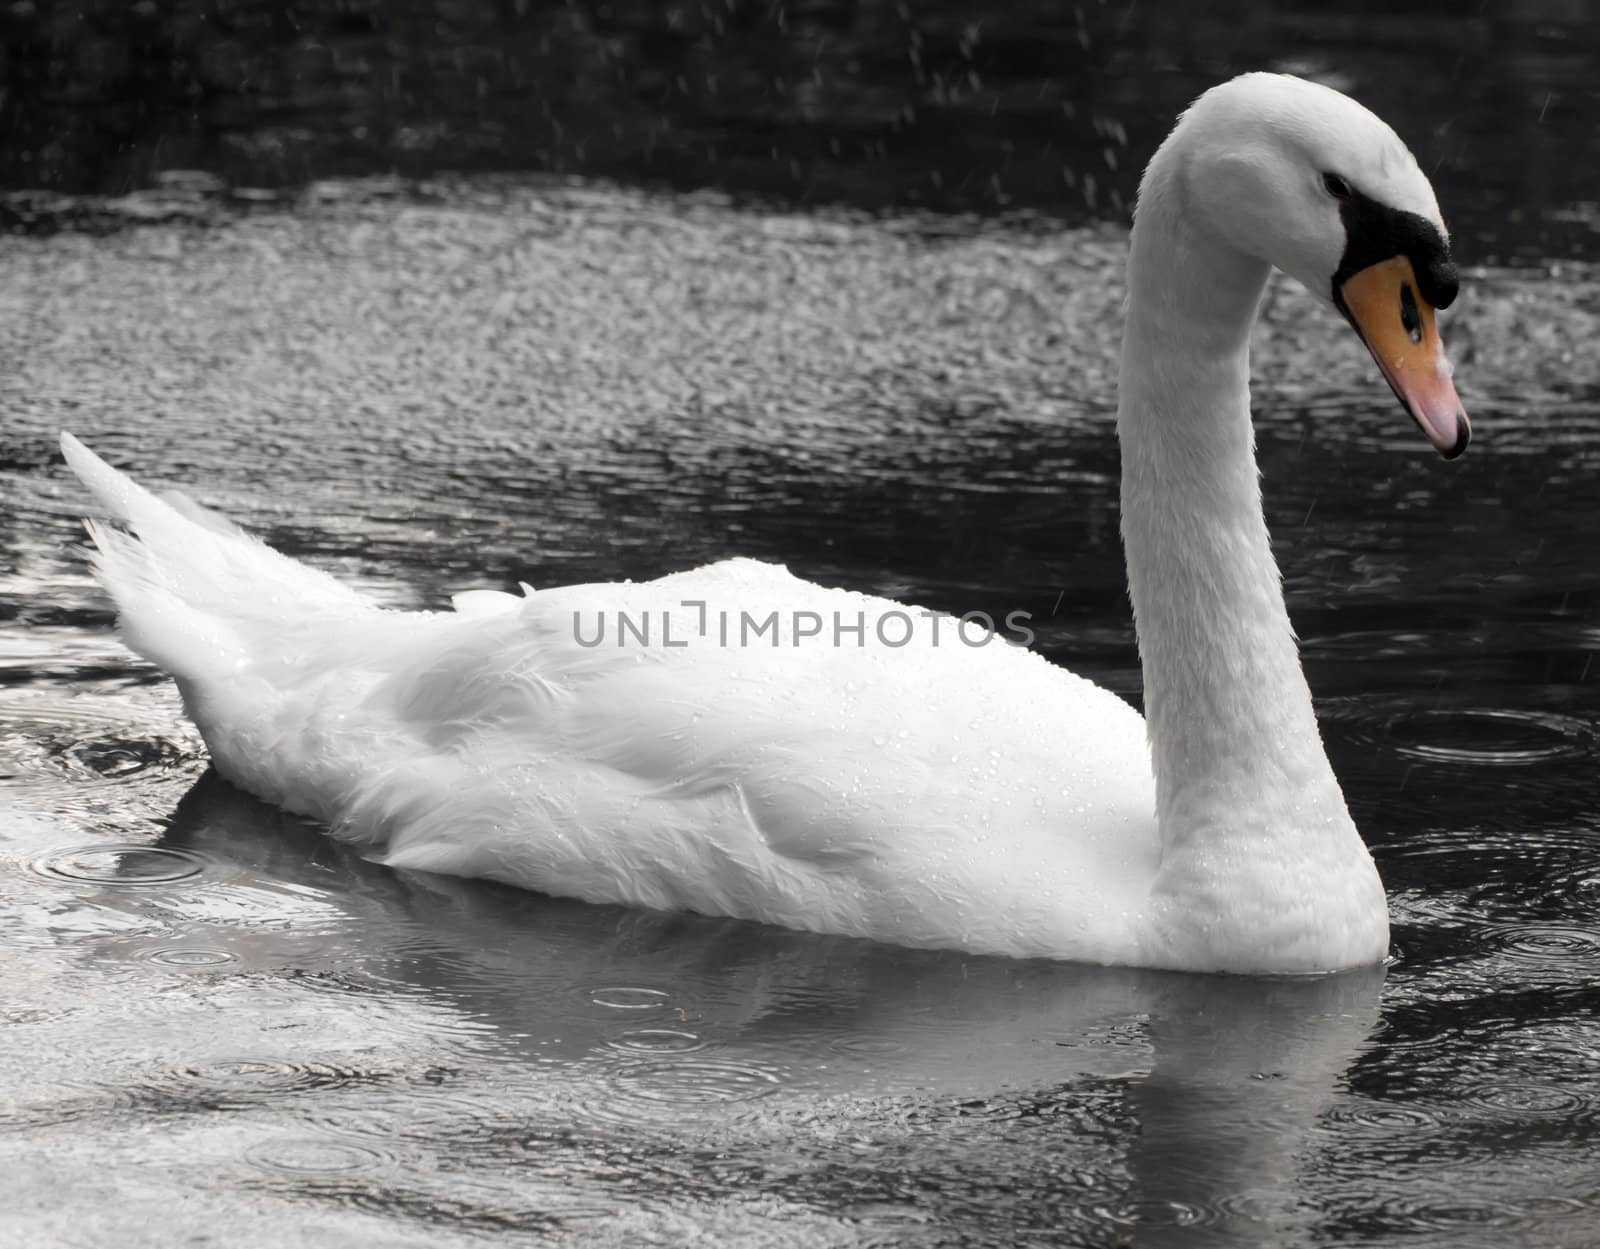 A beautiful swan glides across the water in a seemingly sullen tearful mood